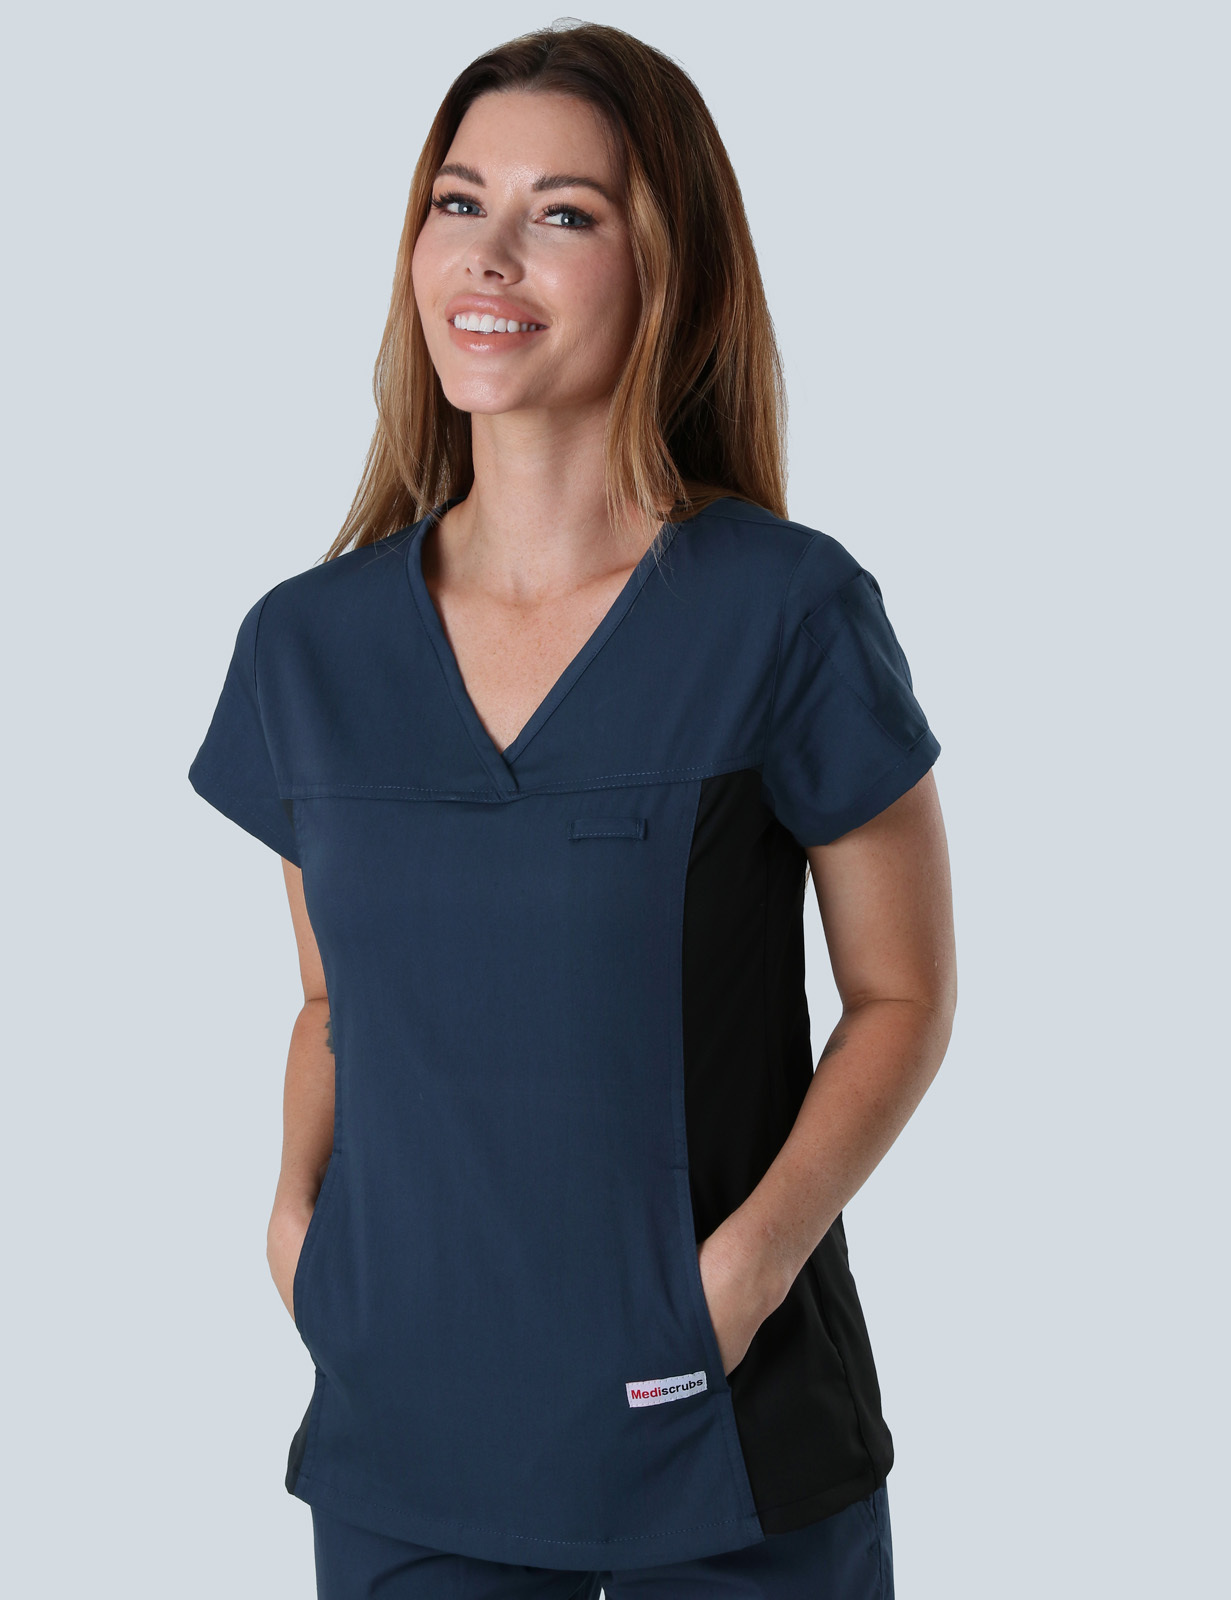 Weipa Hospital - ED AIN (Women's Fit Spandex Scrub Top and Cargo Pants in Navy incl Logos)